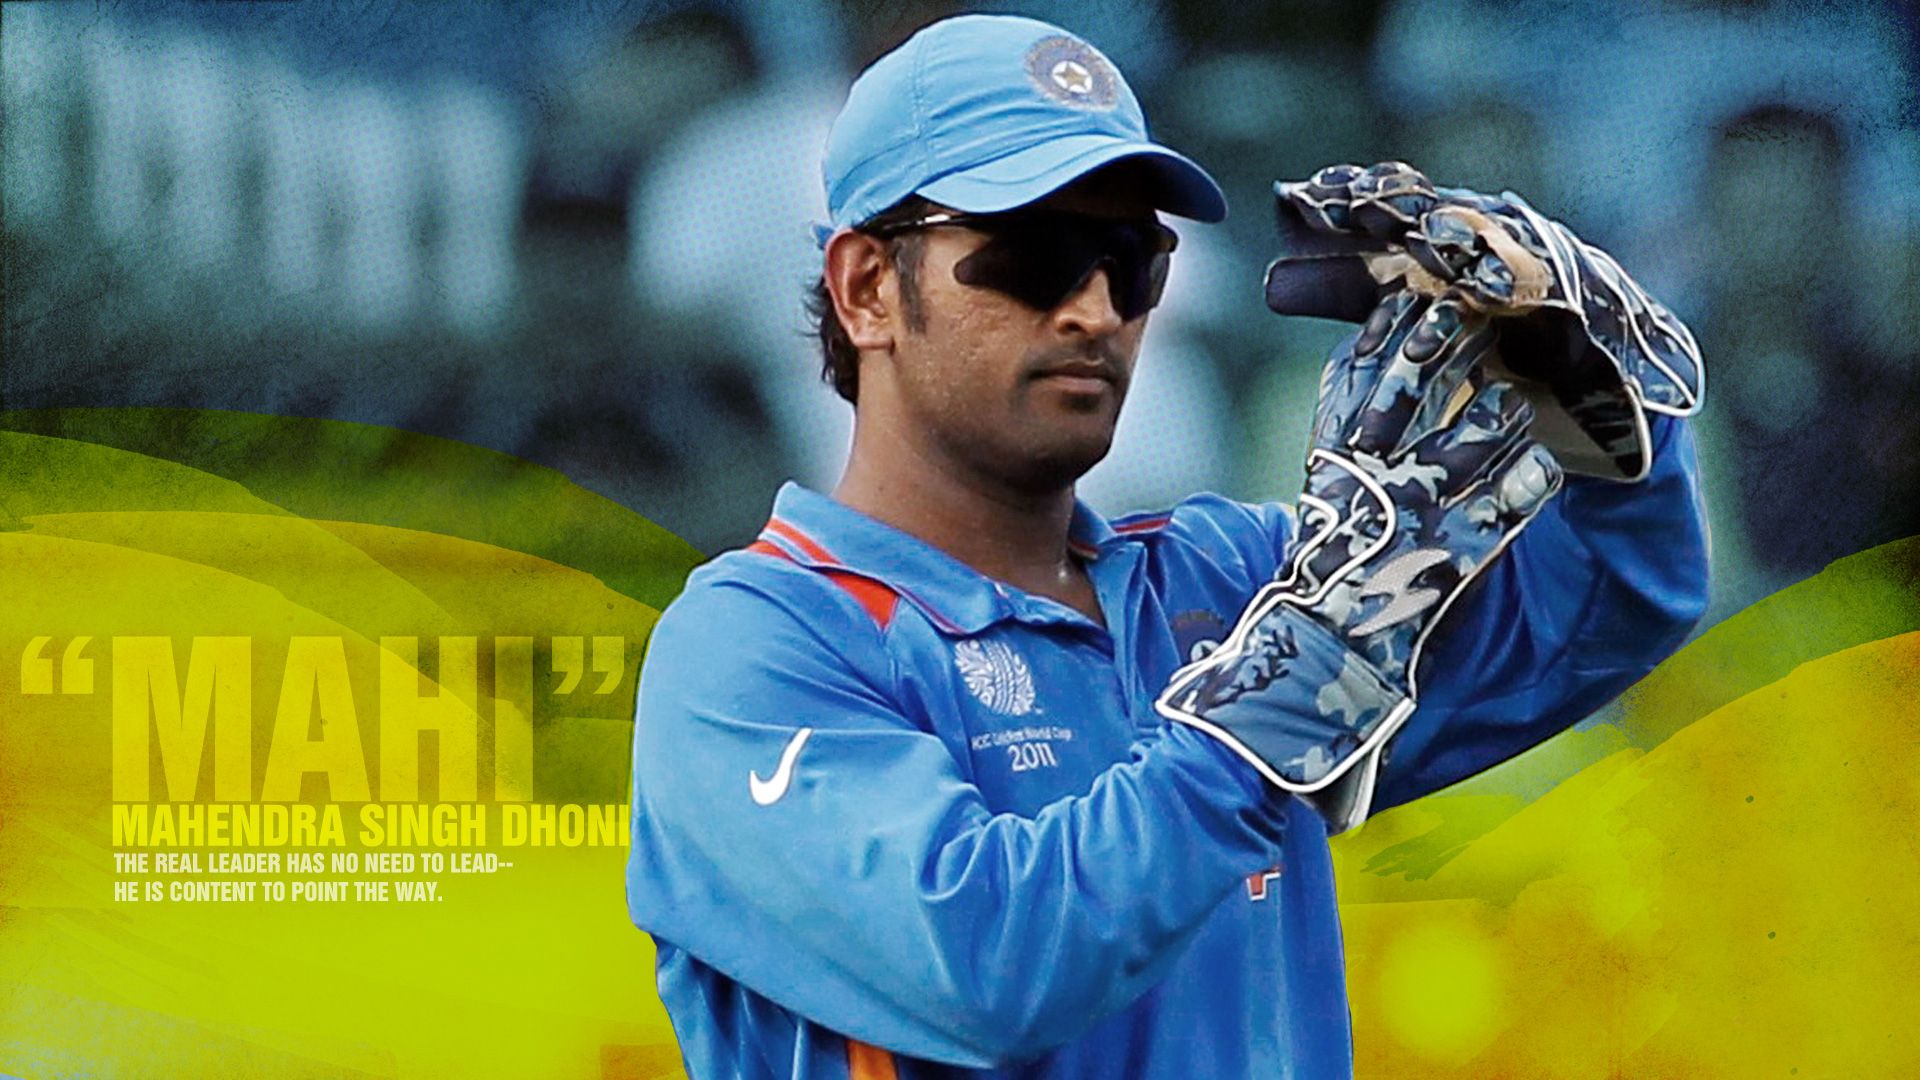 Ms Dhoni Wallpapers